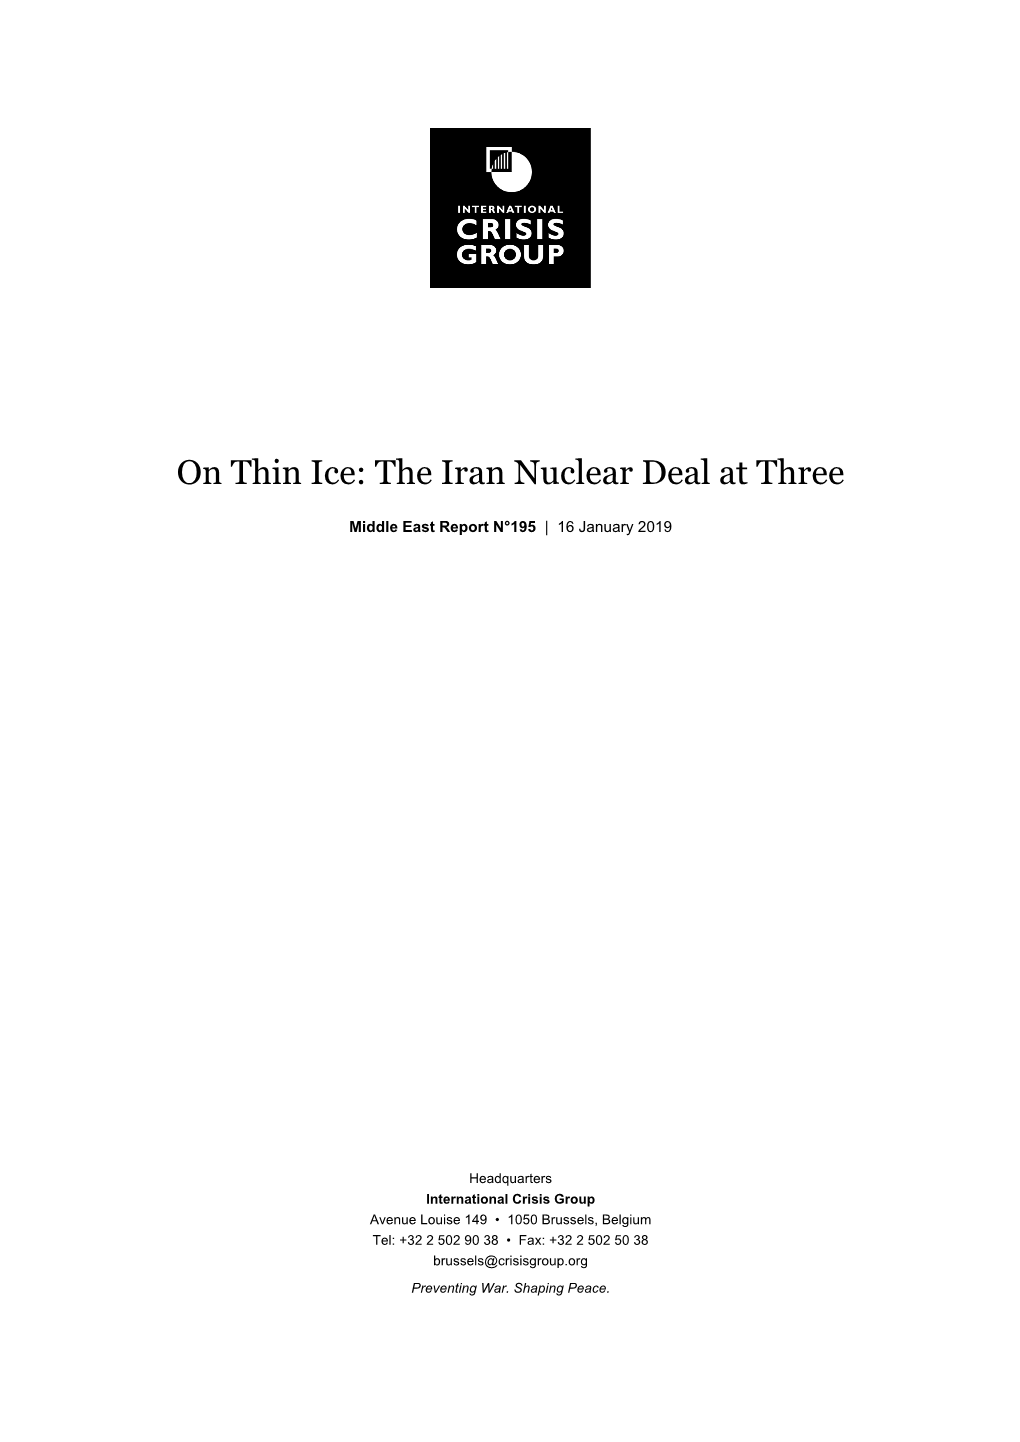 On Thin Ice: the Iran Nuclear Deal at Three